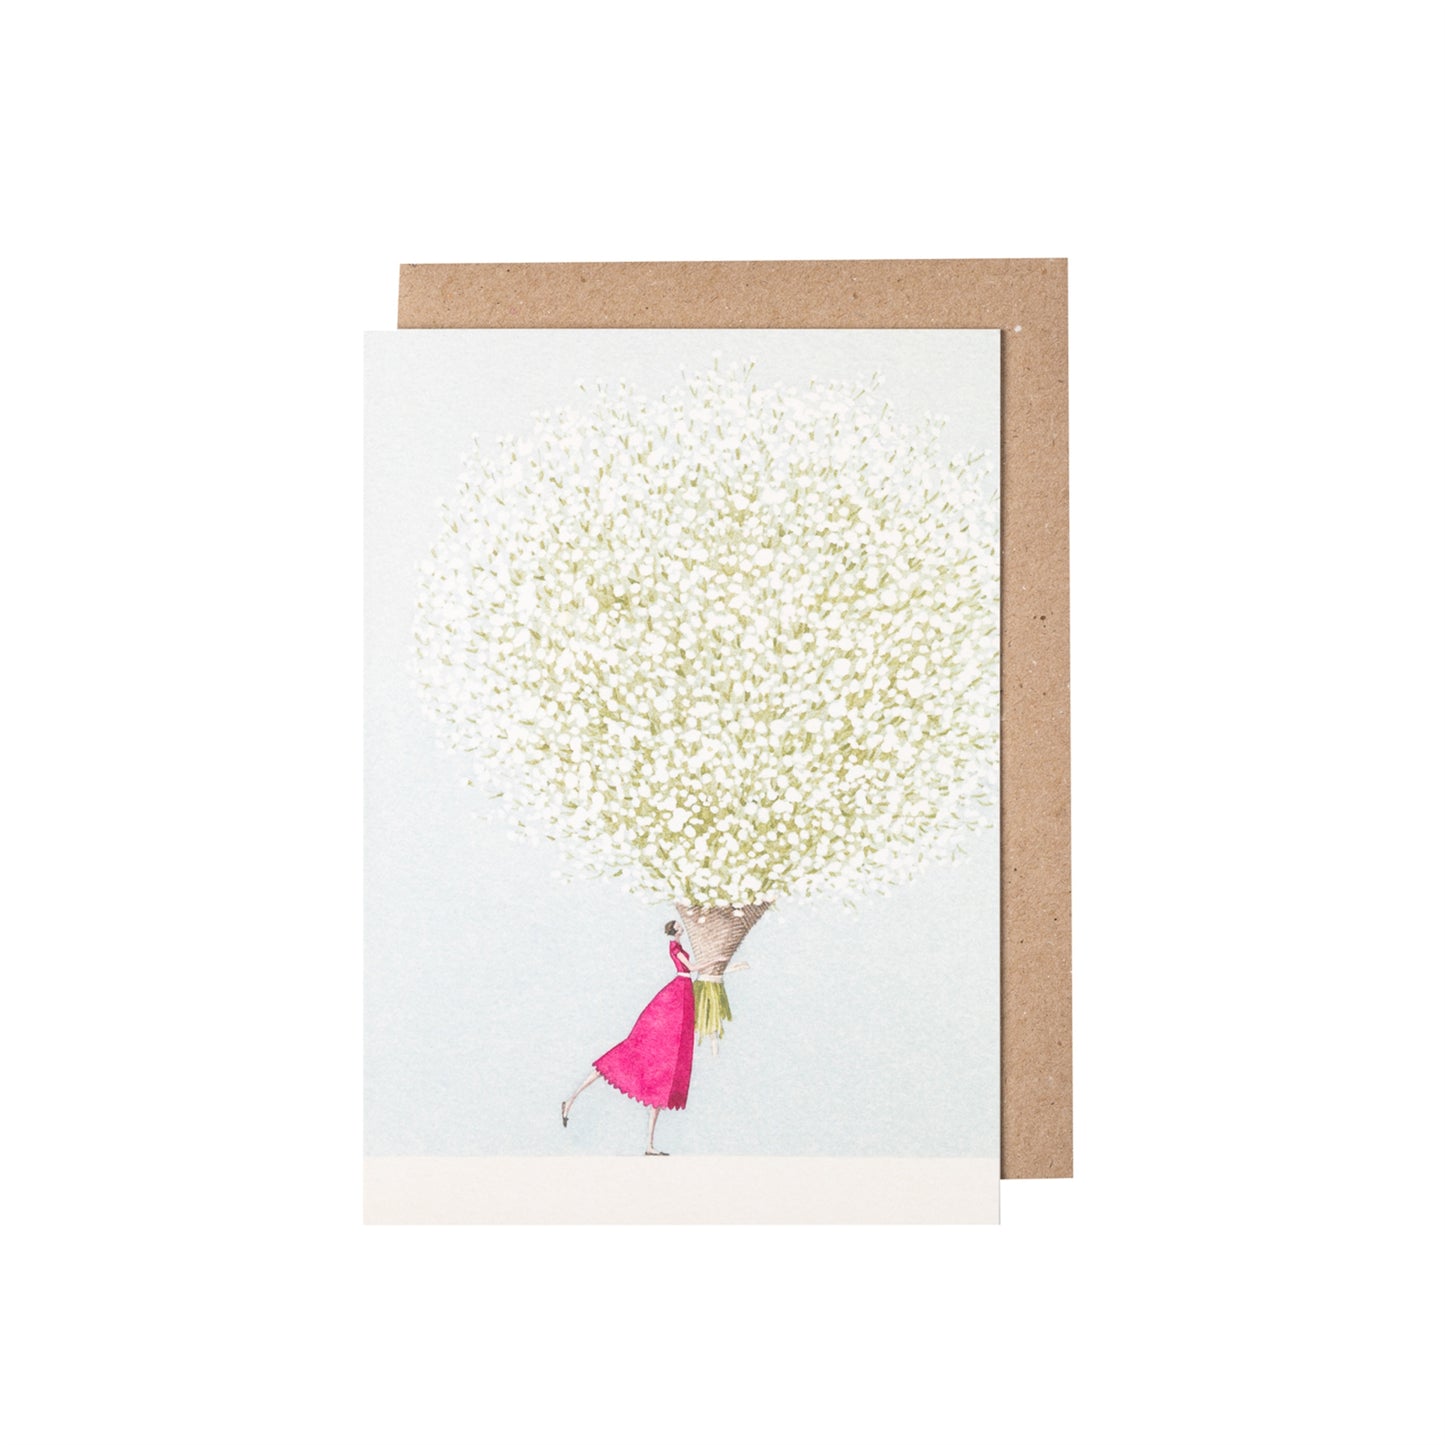  Image of the greeting card Baby's Breath. It is a lady holding a giant bouquet of white bays breath.